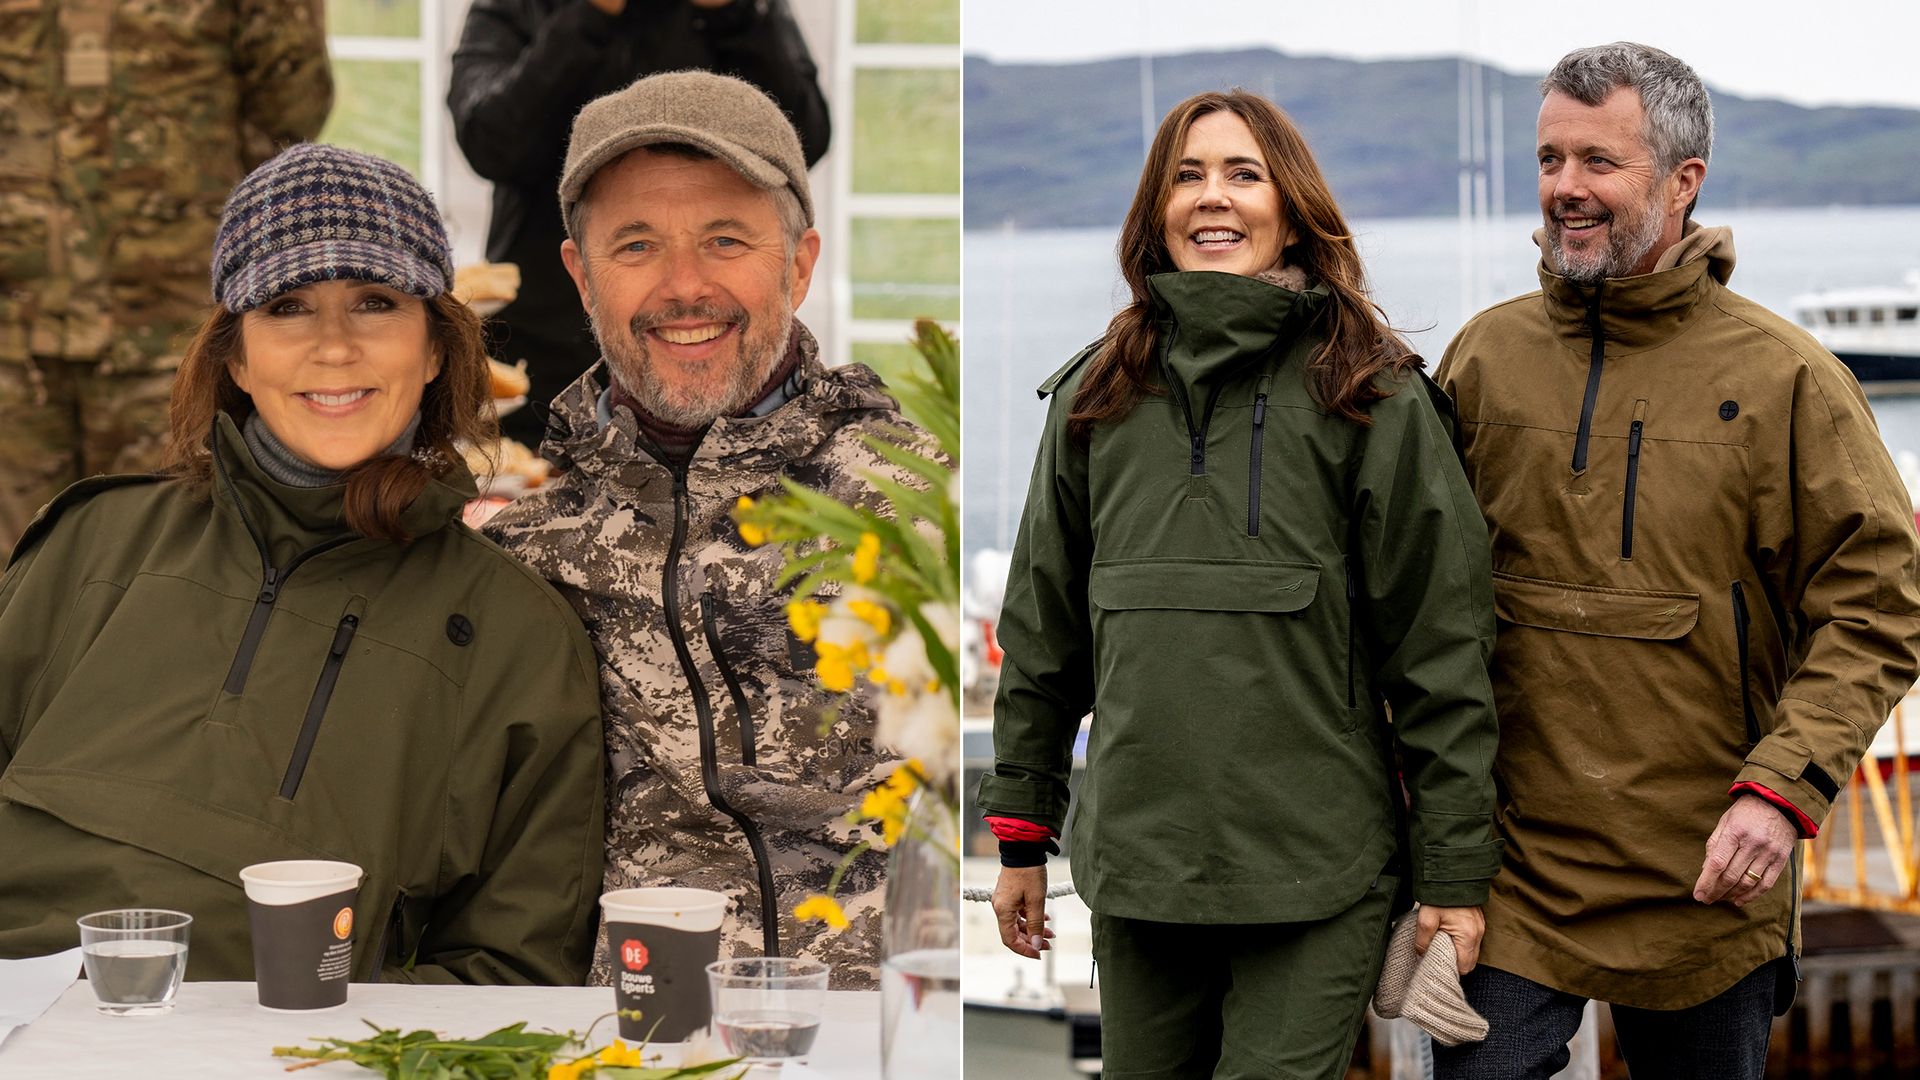 King Frederik and Queen Mary carried out a week-long tour of Greenland in a significant milestone for the couple in the first six months of Frederik's reign.  The Danish royals, who celebrated their 20th wedding anniversary in May, were very tactile with one another on their trip.  Photos shared on their official Instagram account show the pair cuddled up together during a coffee morning in the village of Qassiarsuk.  Other snaps showed Frederik and Mary with their arms around one another as they boarded a boat and enjoyed a scenic walk along the coastline.  The pair were also joined by their 13-year-old twins, Prince Vincent and Princess Josephine, earlier on the tour, where they visited an Arctic research station and took part in a family fun day in Qeqertarsuaq.  Their royal visit to Greenland came just days after the king and queen celebrated Crown Prince Christian's high school graduation, with the couple spotted wrapping their arms around each other as they left the ceremony.  Take a look at the cosiest pictures of Frederik and Mary from their Greenland trip below…